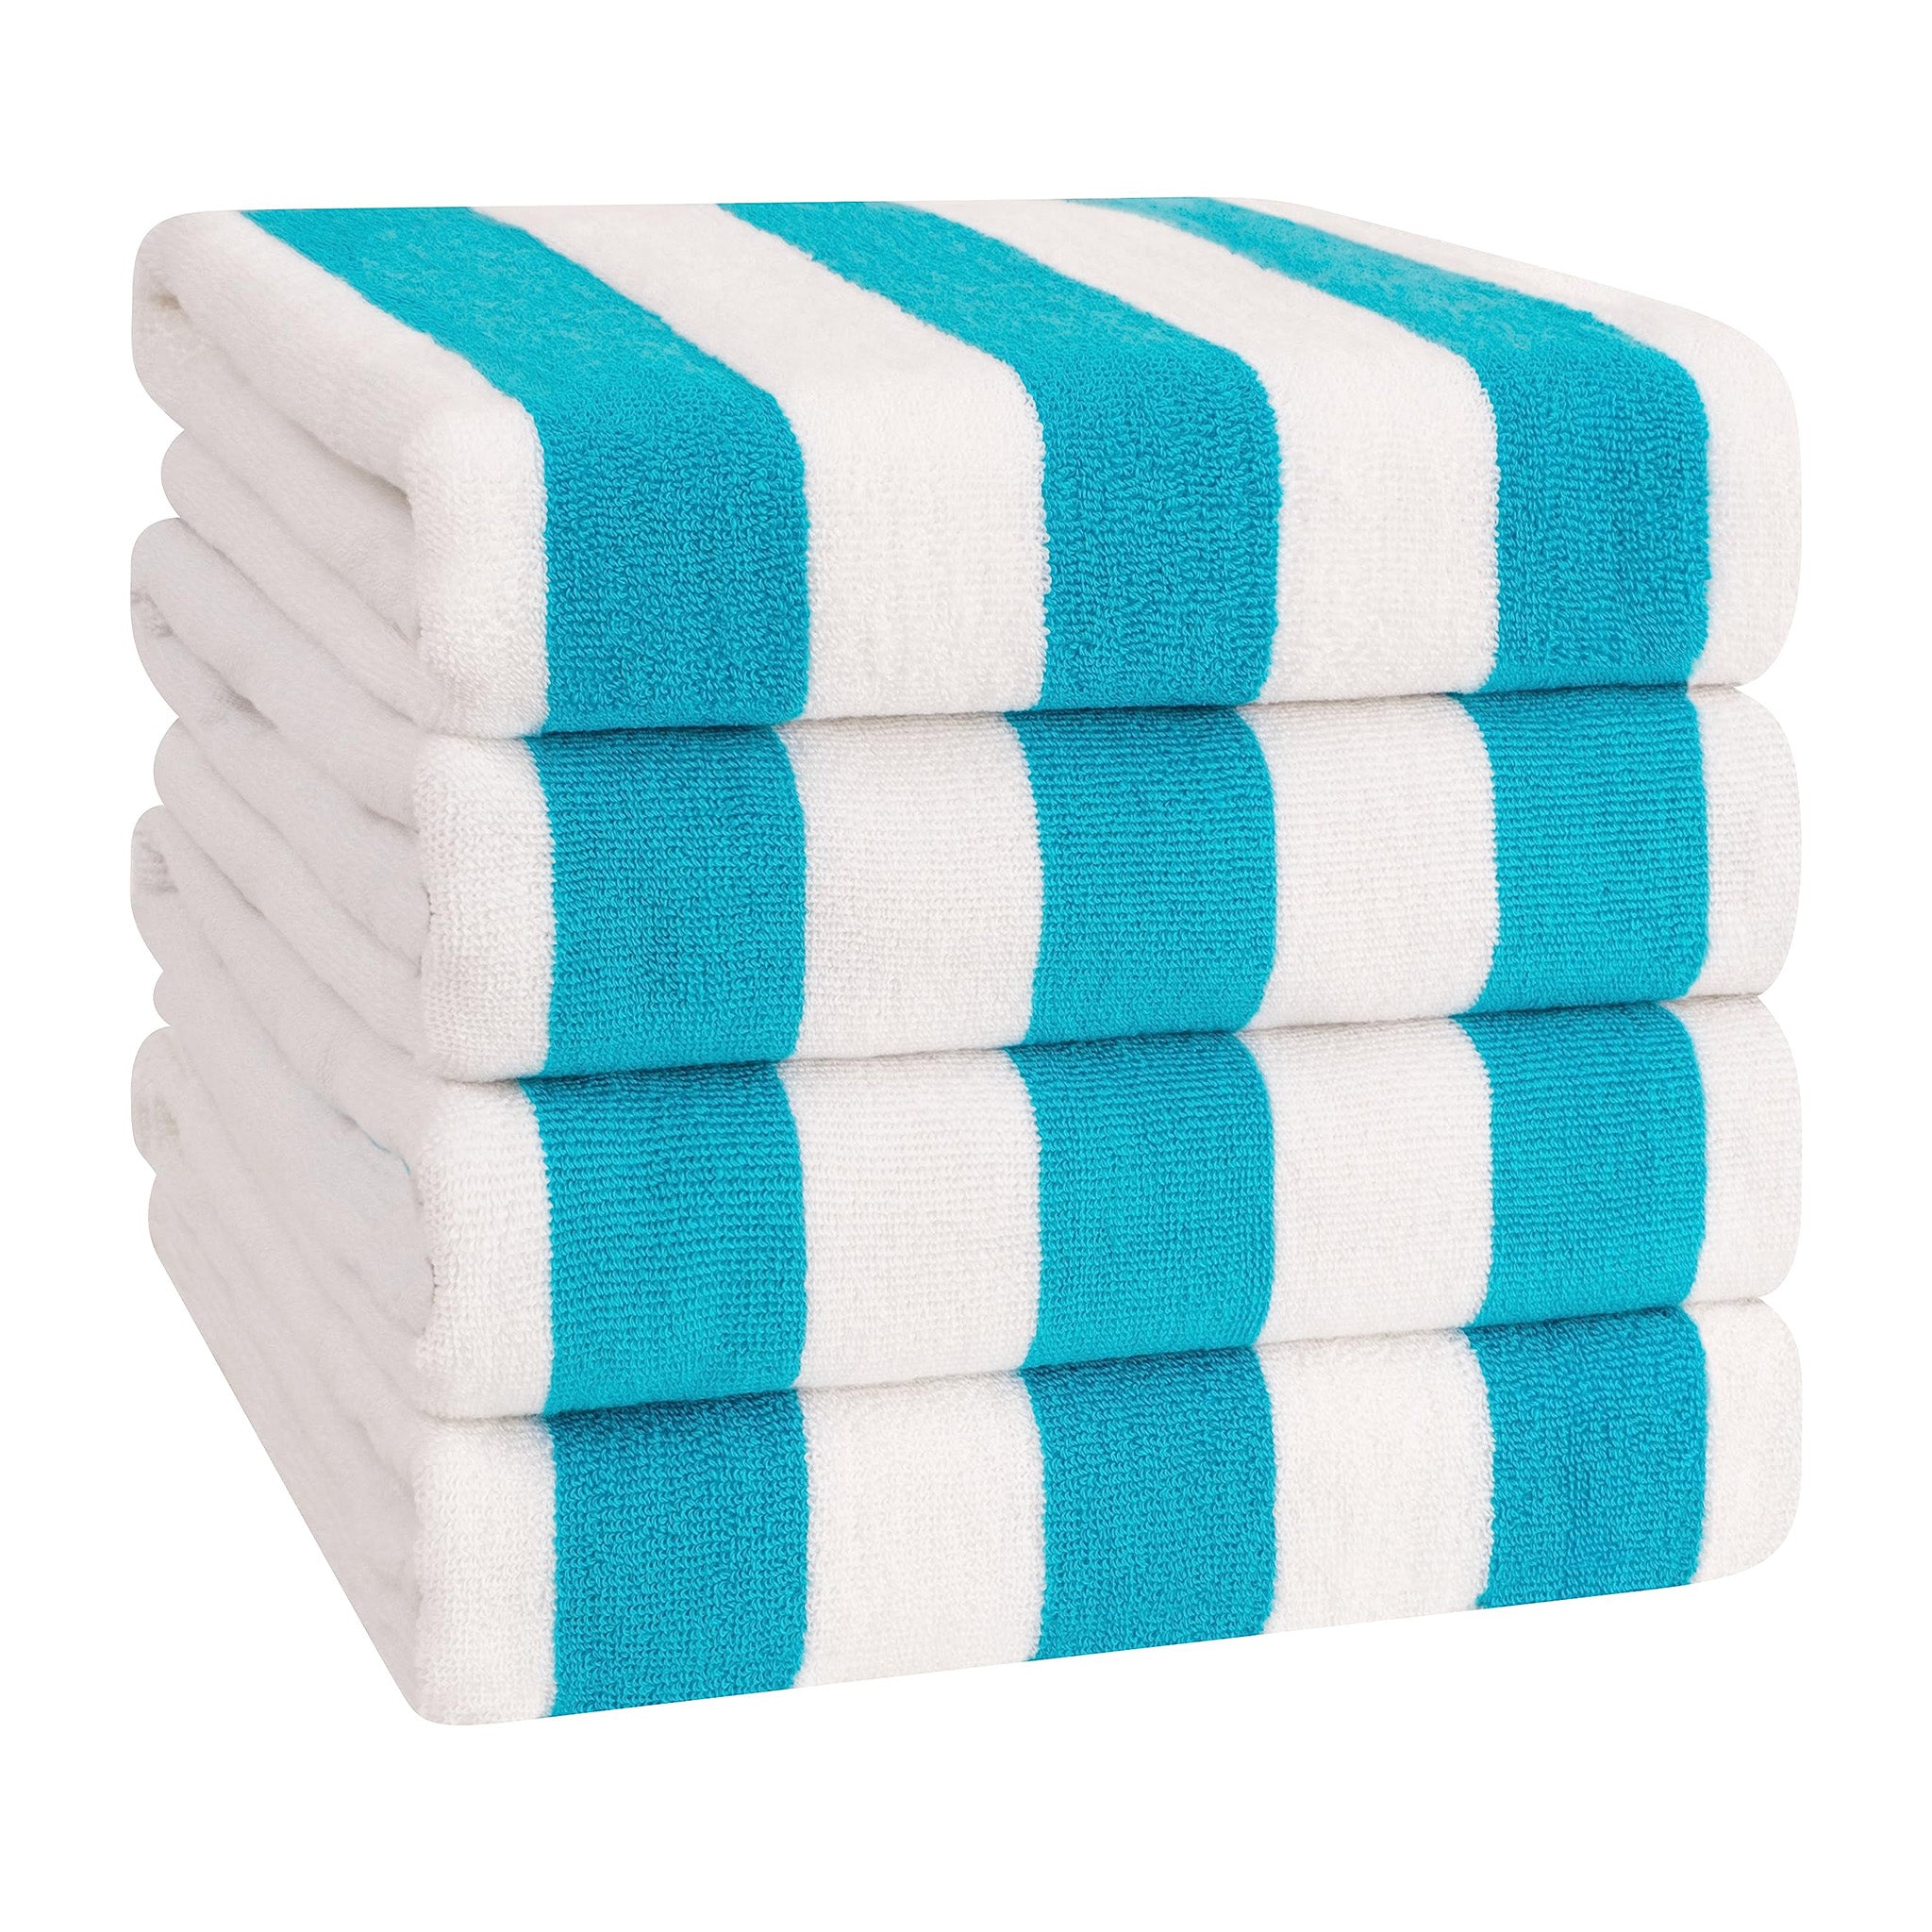 American Soft Linen 100% Cotton 4 Pack Beach Towels Cabana Striped Pool Towels -turquoise-blue-1